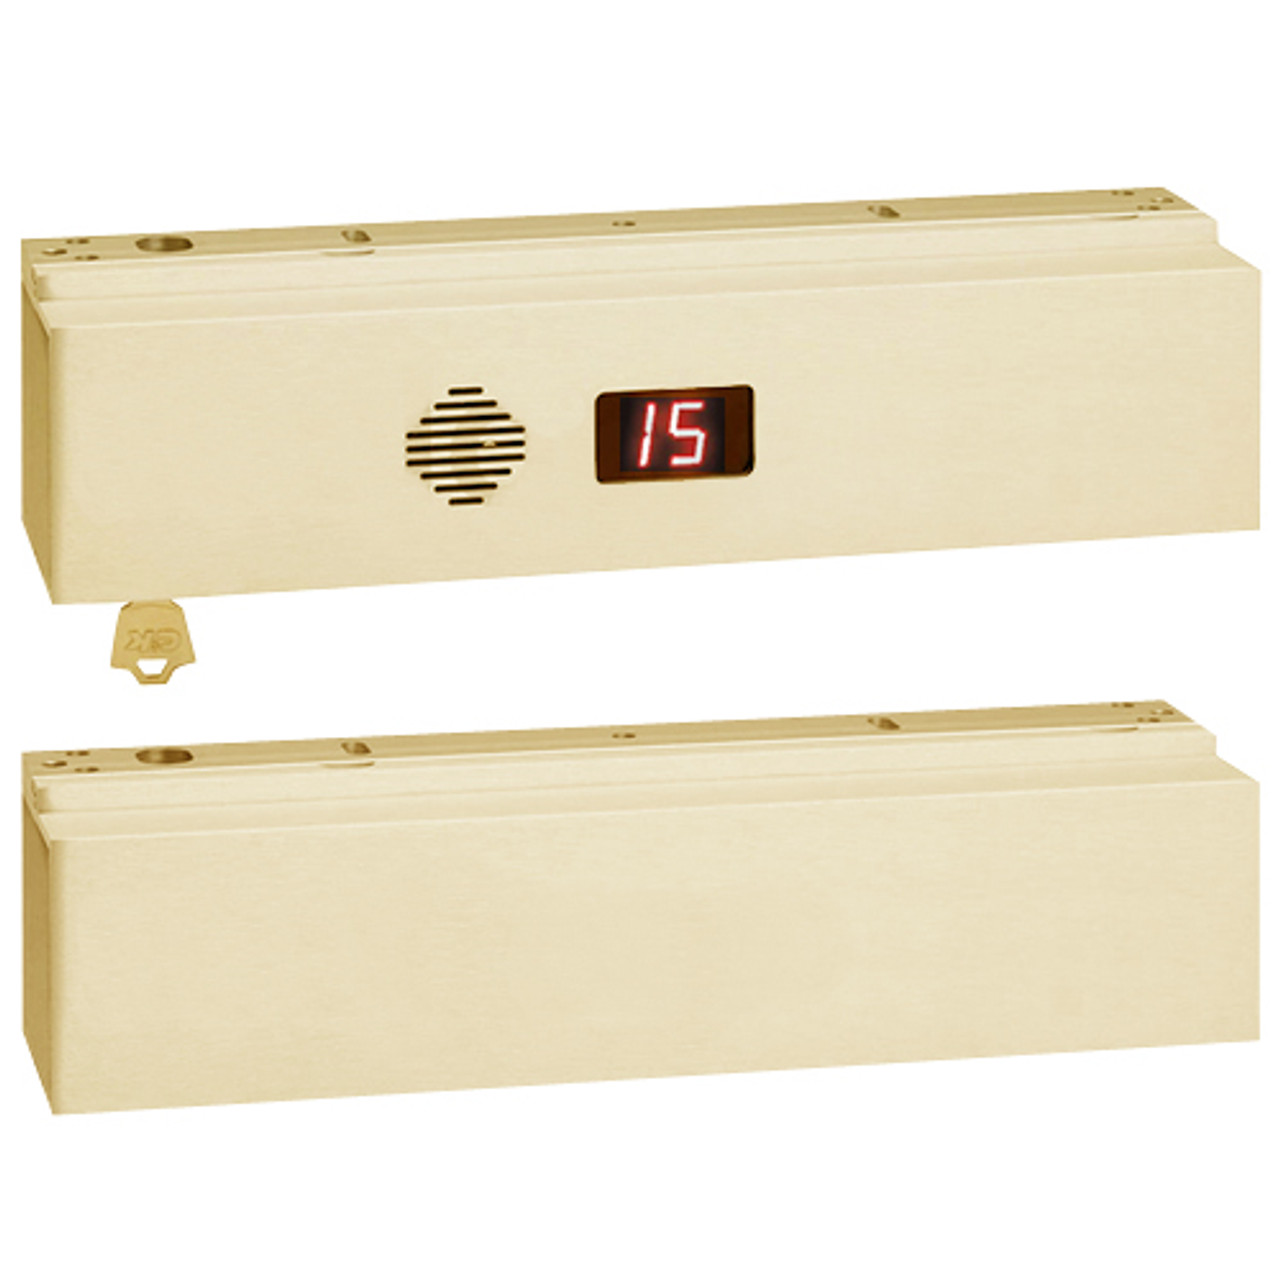 1511T-NC-K-C-B2A2 SDC 1511T Series Tandem Integrated Delayed Egress Locks with Magnetic Bond Sensor and Anti-Tamper Switch in Brass Powder